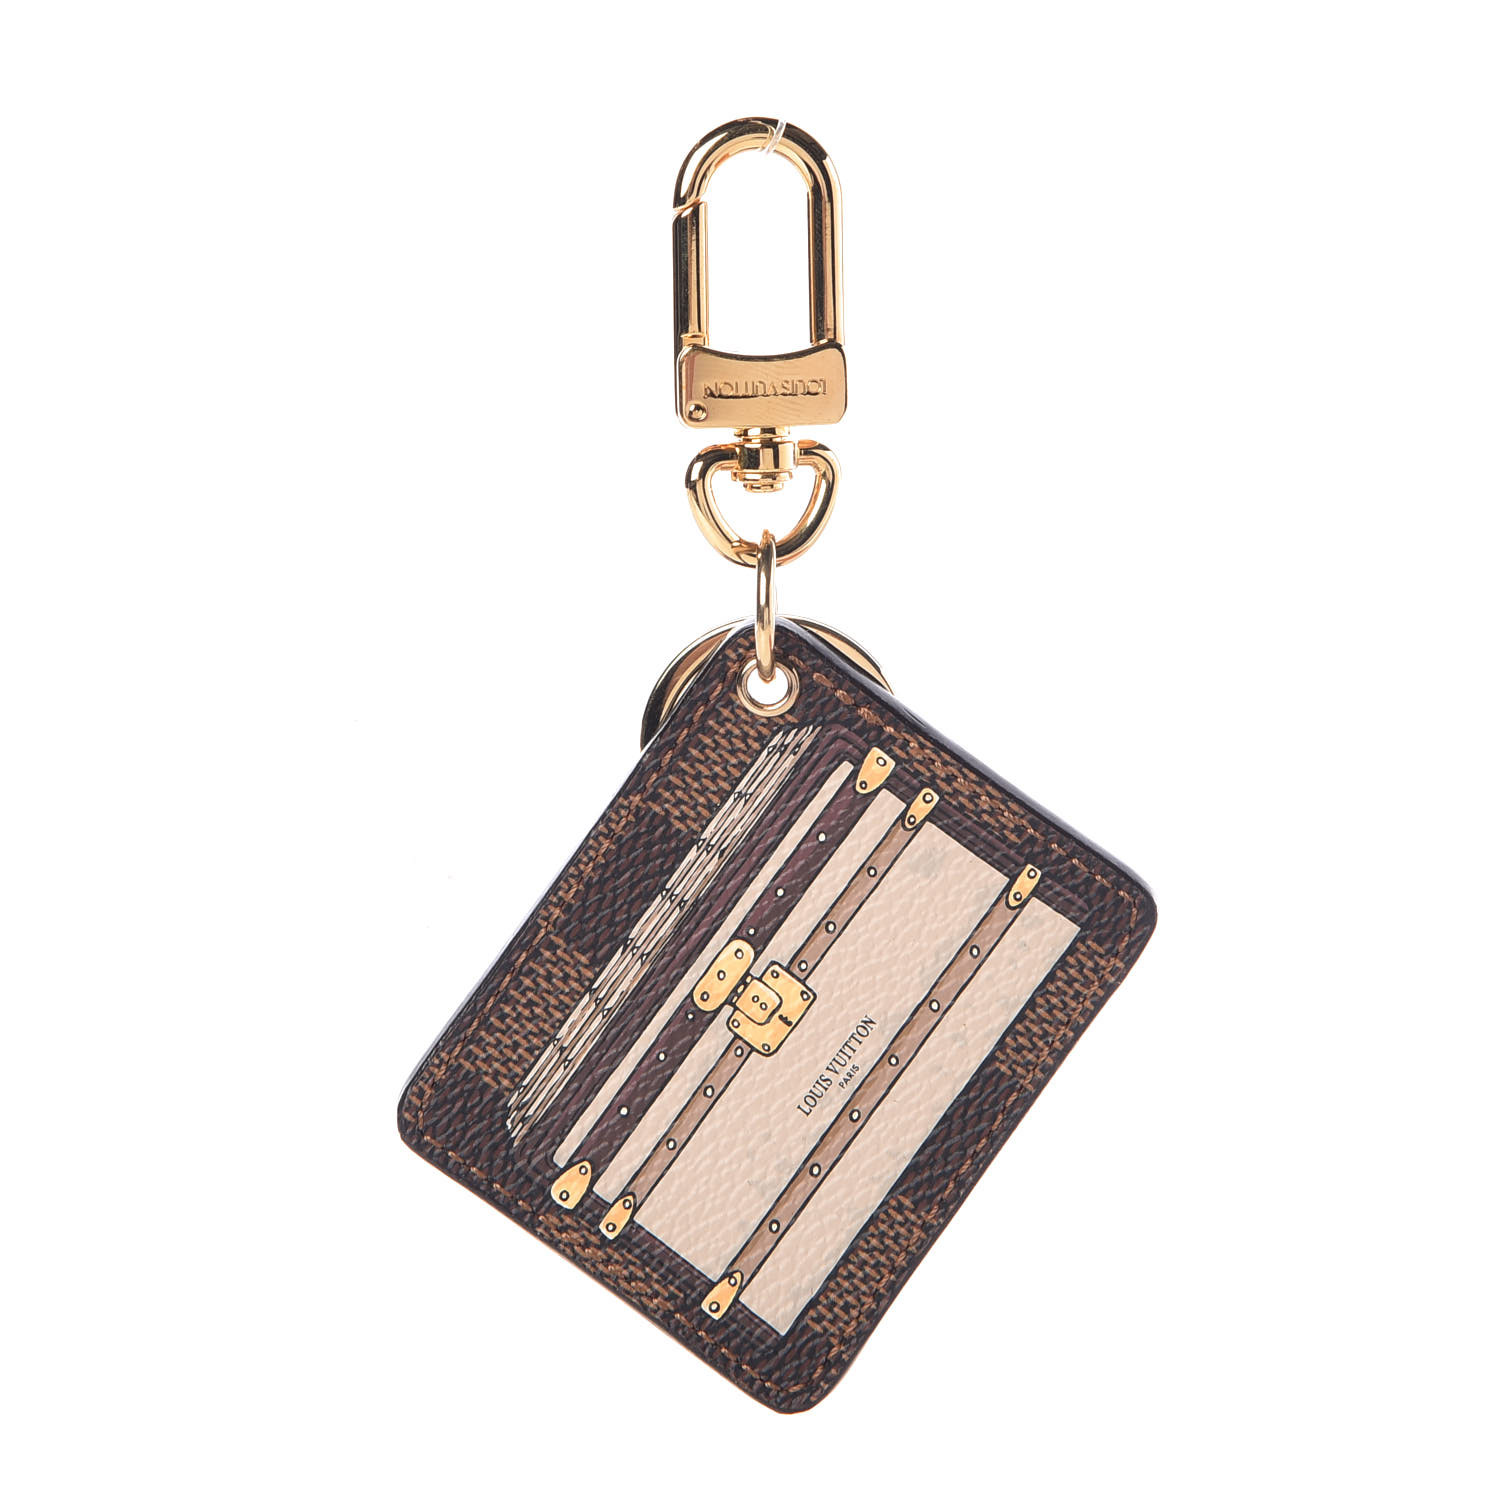 Louis Vuitton Trunks And Bags Bag Charm